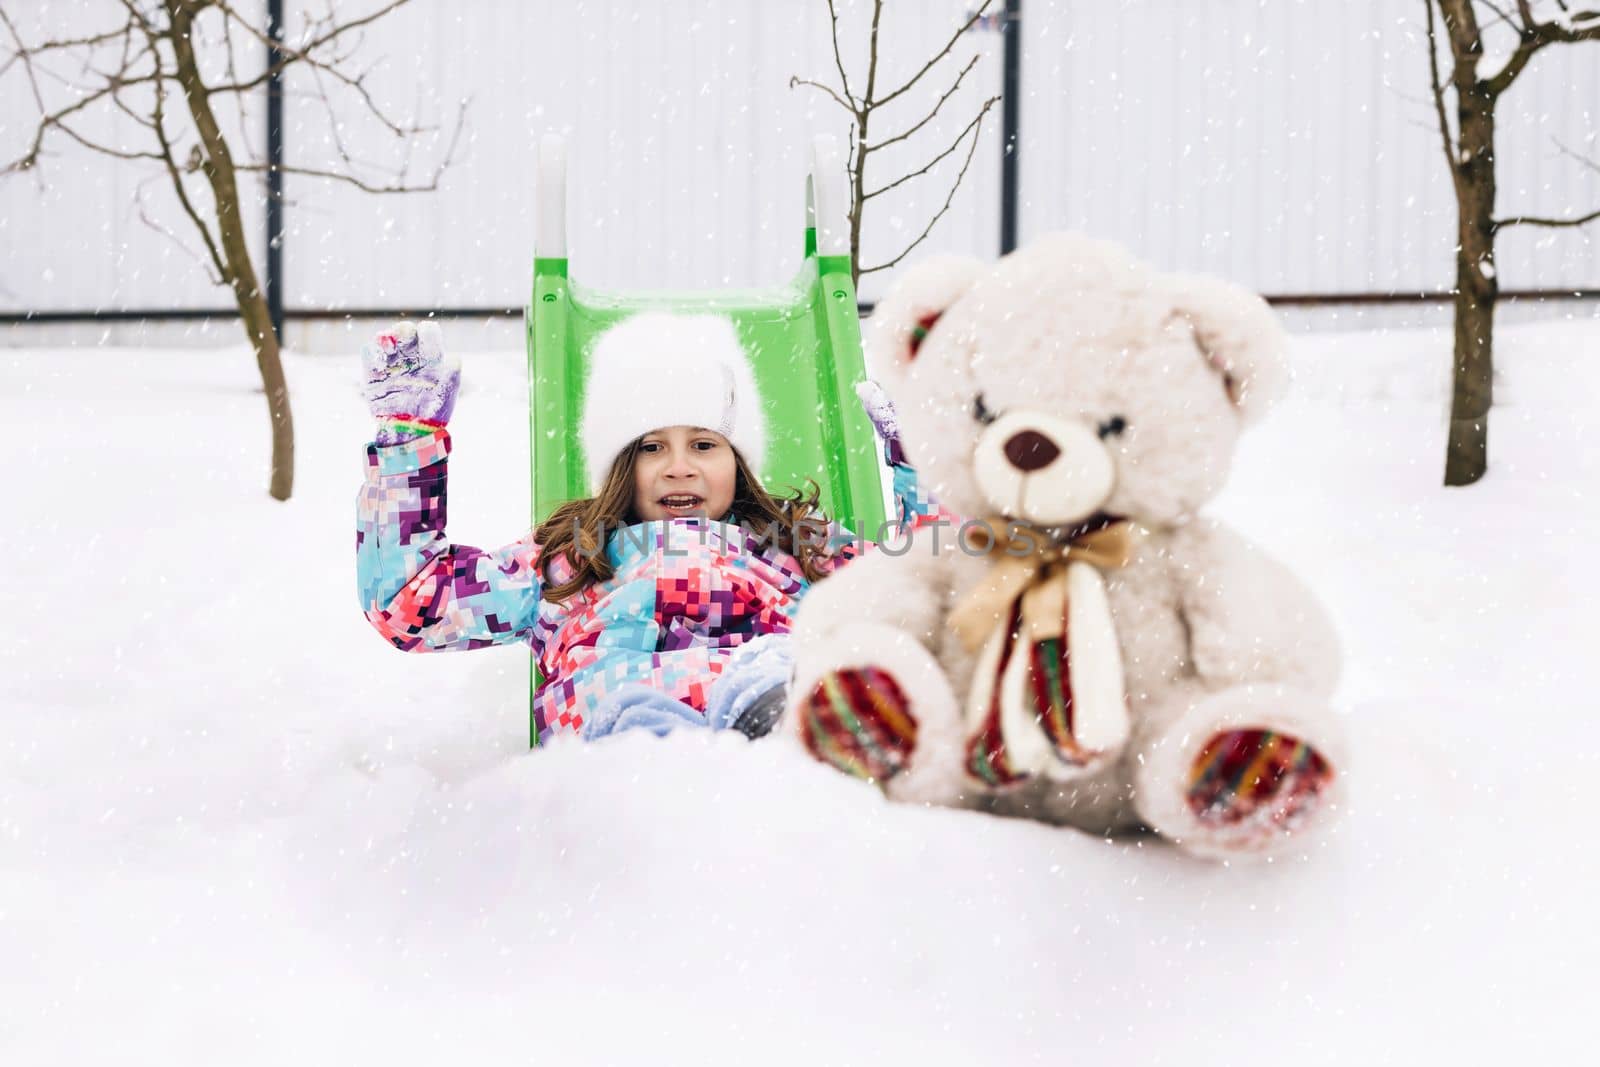 Cute toddler girl playing with teddy bear in winter park. Winter portrait of little caucasian child girl. Outdoor winter activities for kids by uflypro